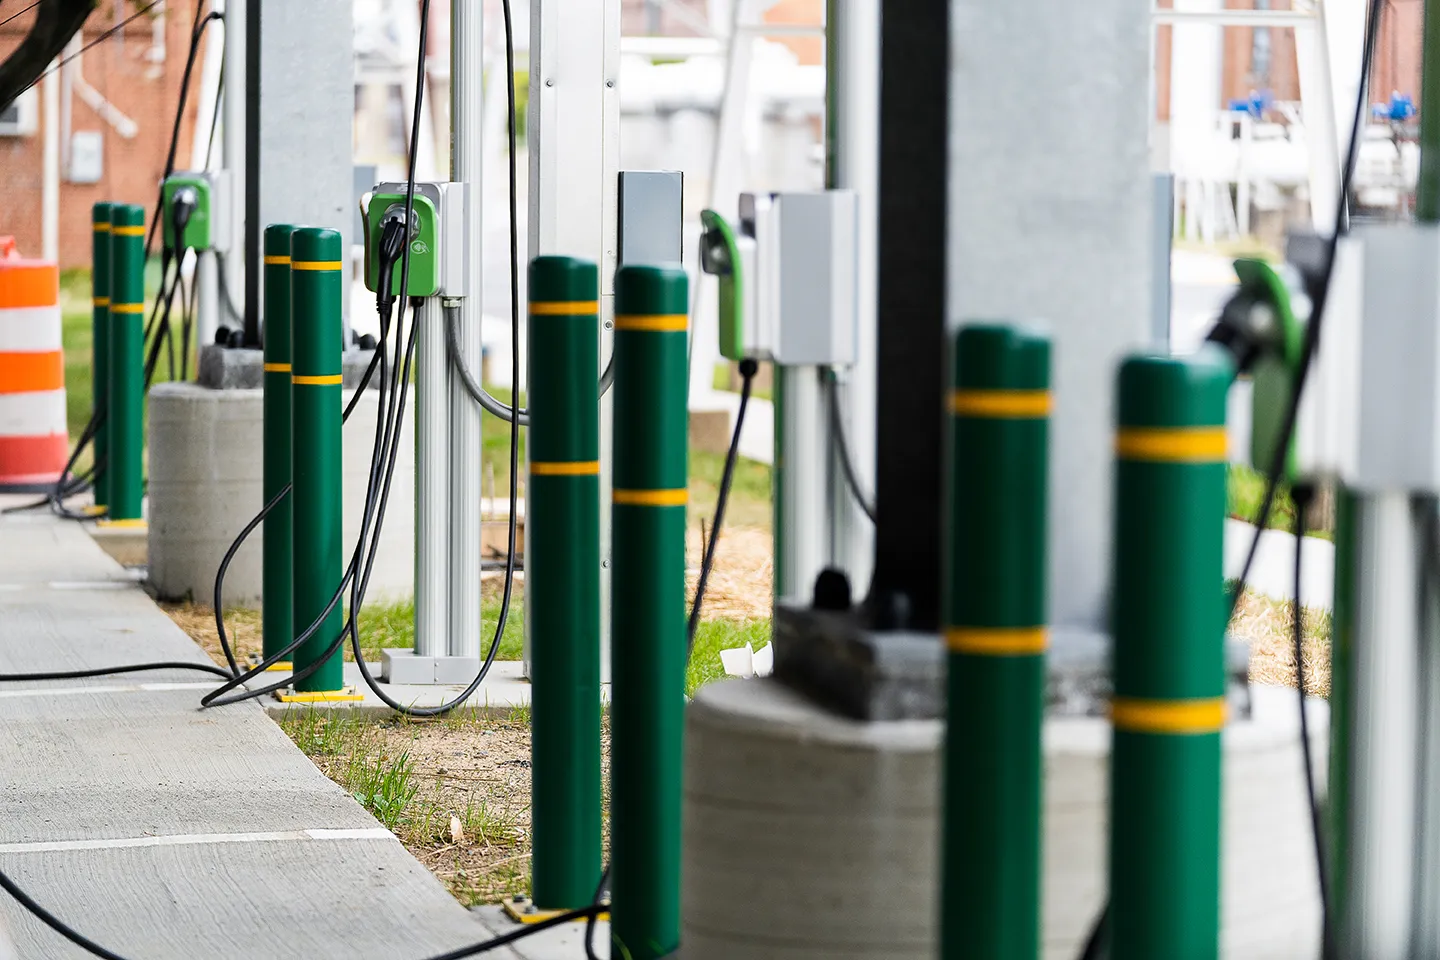 Electric vehicle charging stations help to decarbonize fleets and increase an organization’s sustainability.